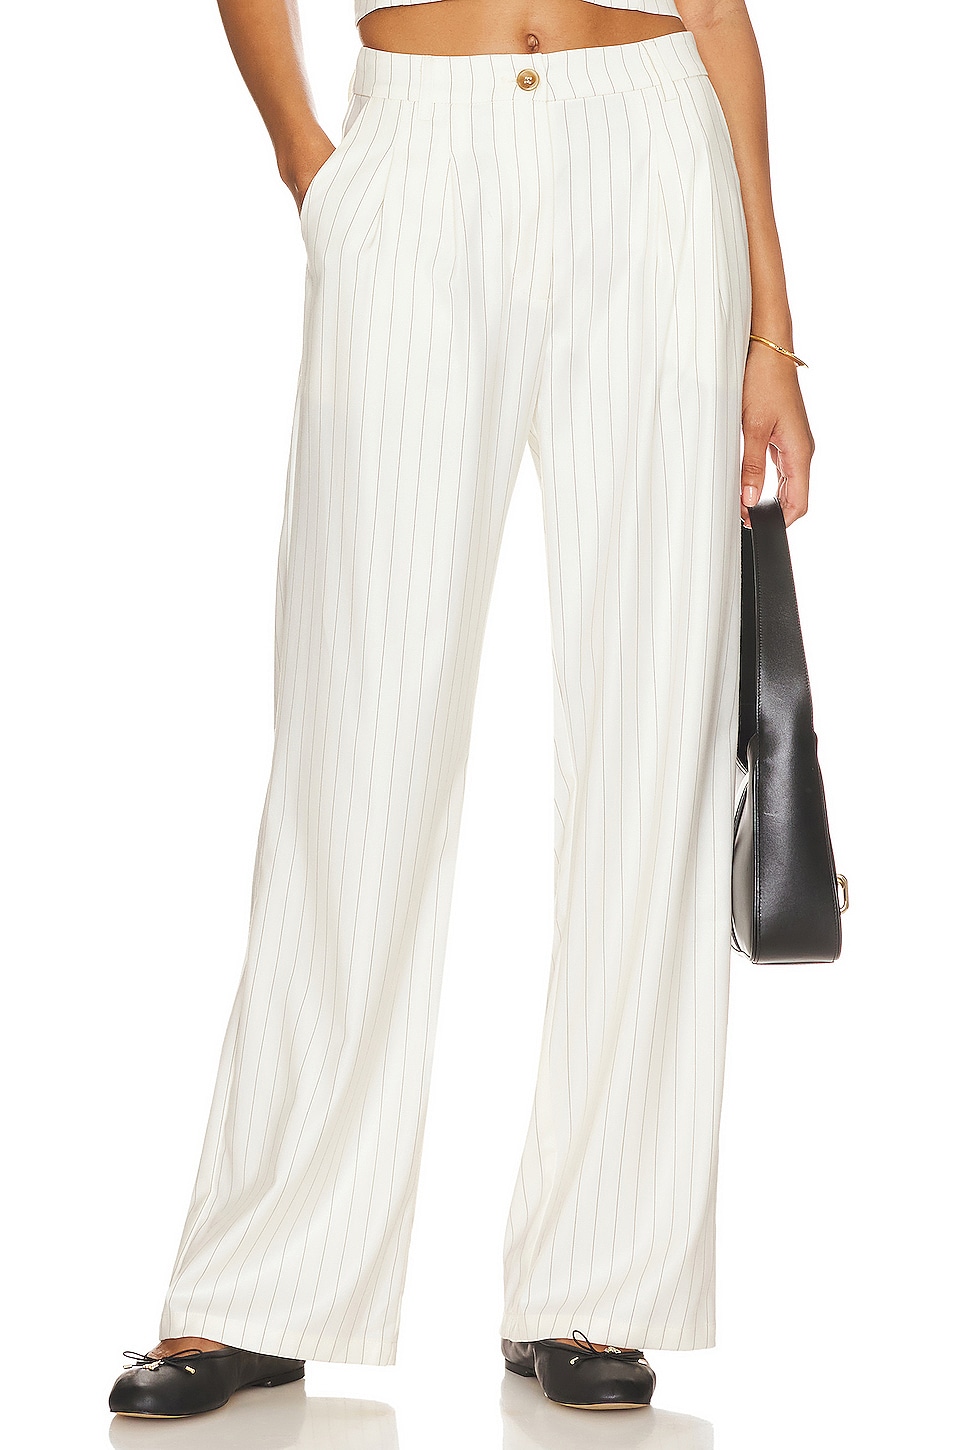 Line & Dot Jane Pant in Off White